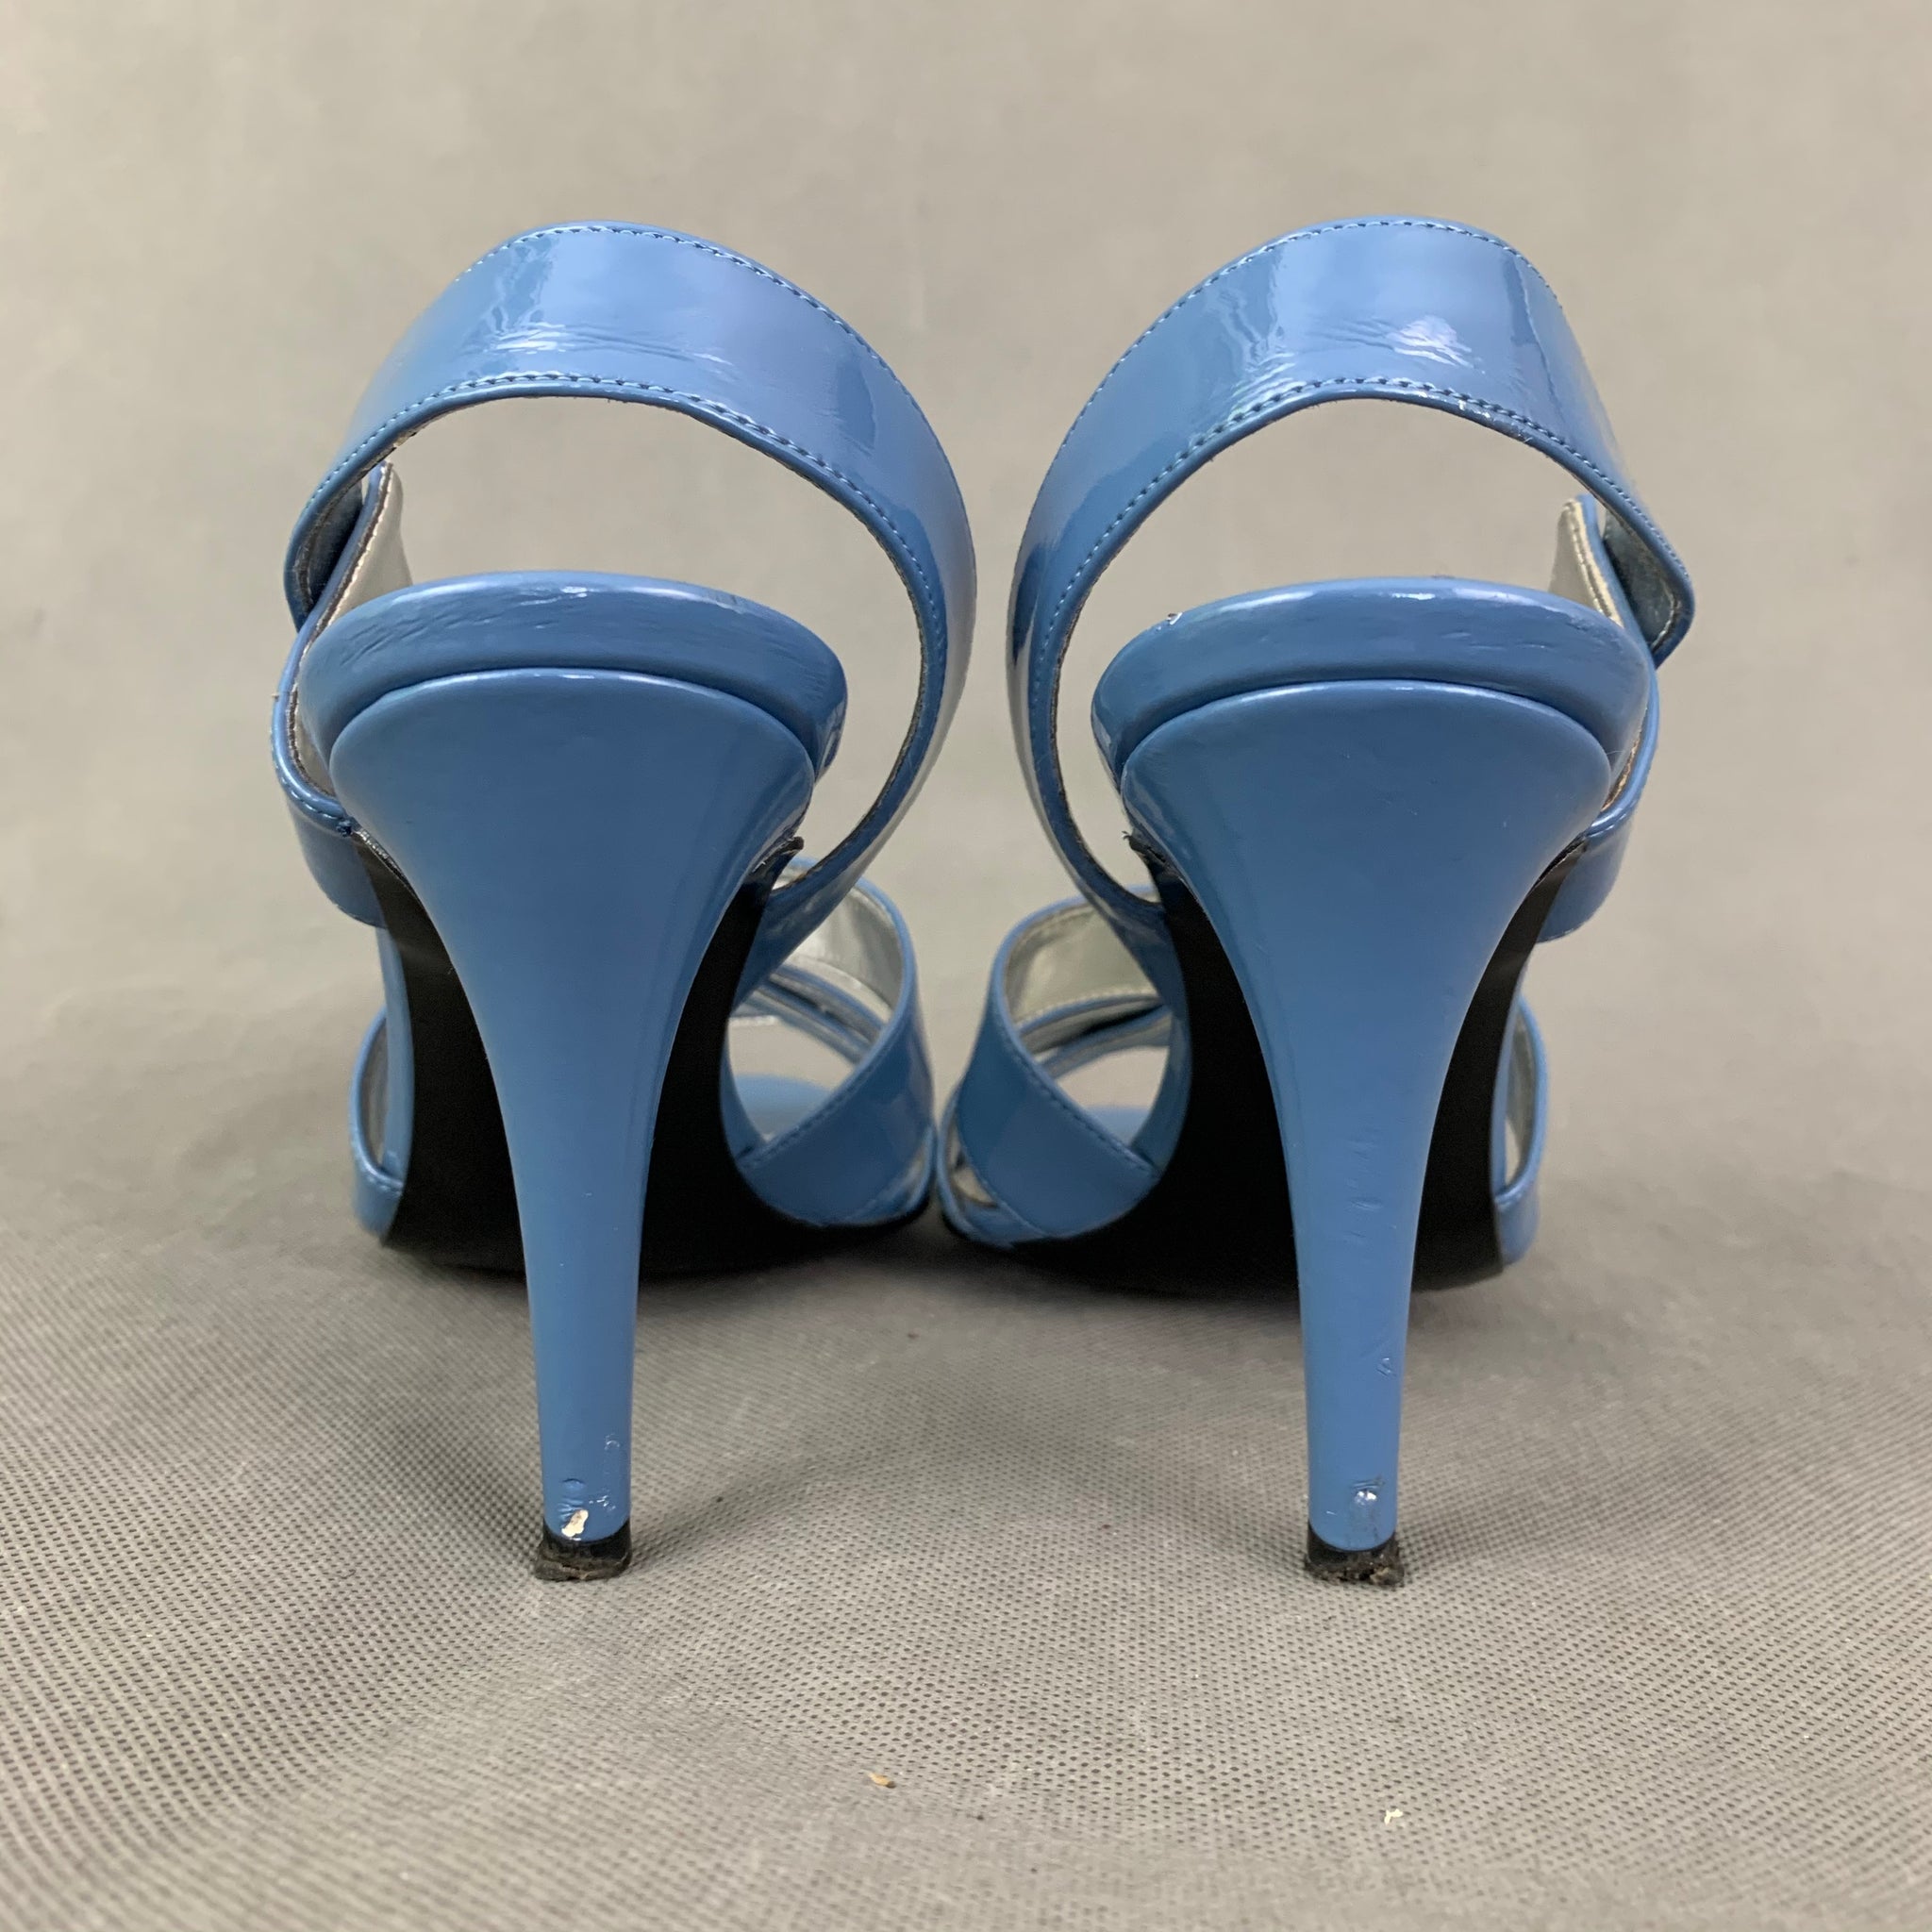 The World's First Fully Convertible High Heels | Pashion Footwear